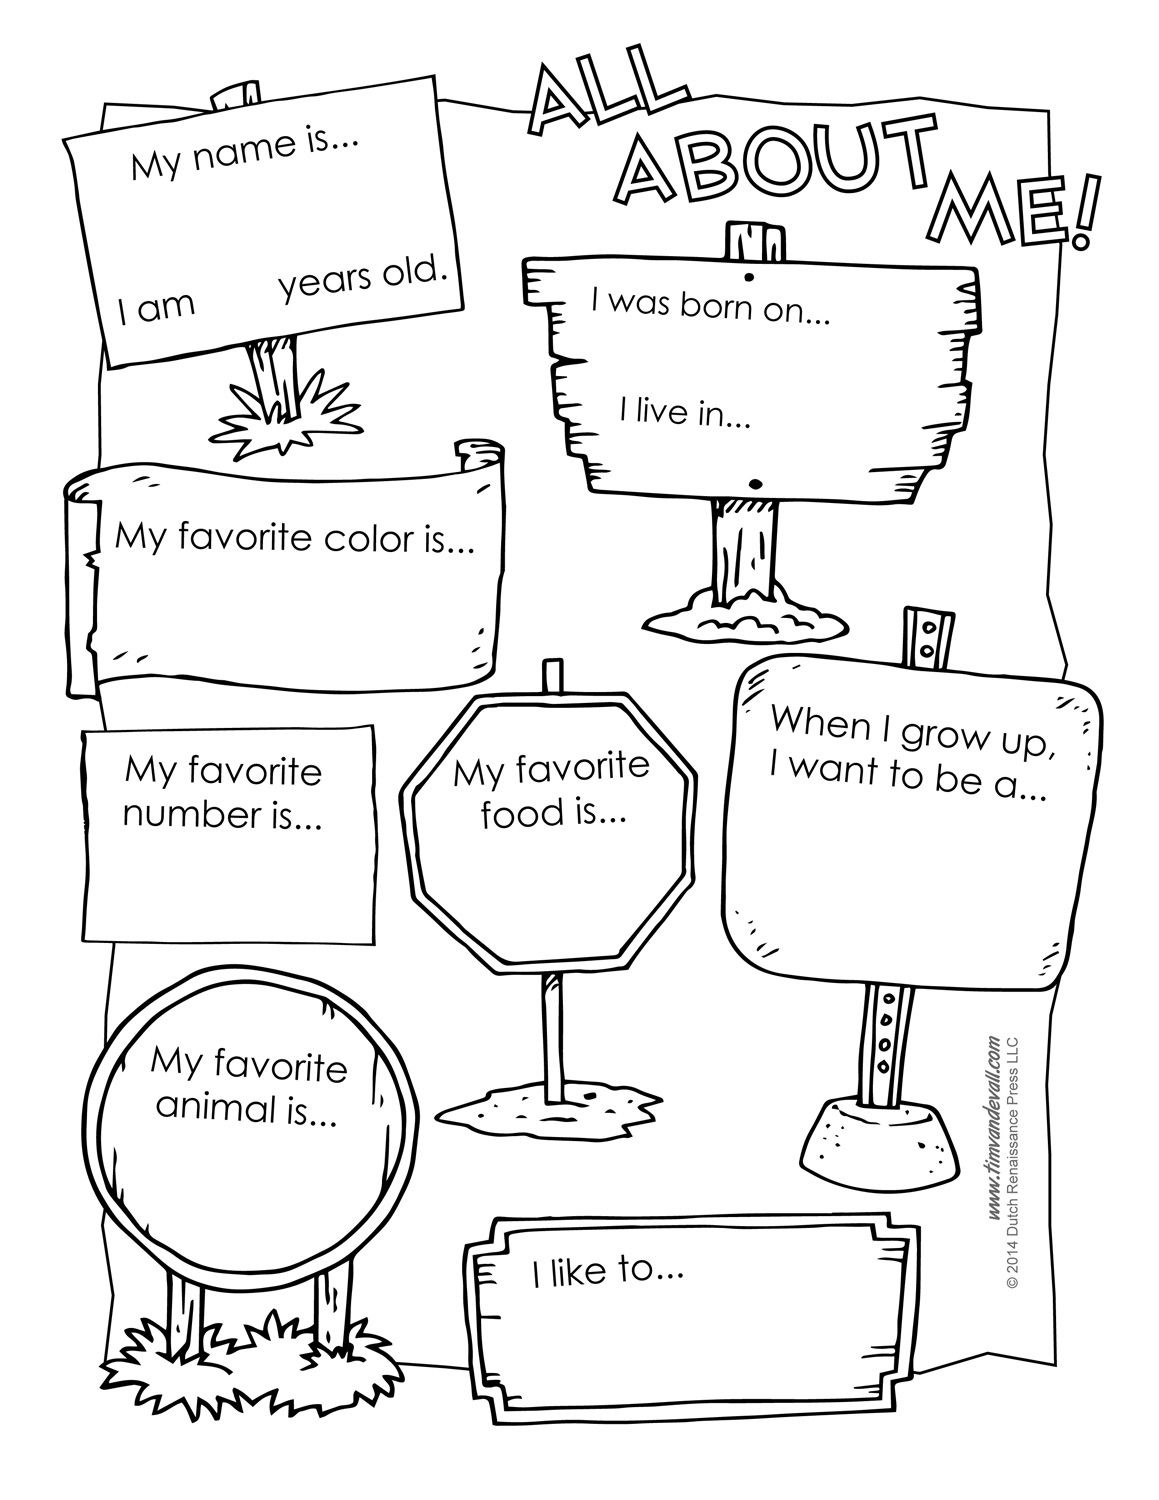 Pinangela Sanguino On Education All About Me Worksheet, All Free